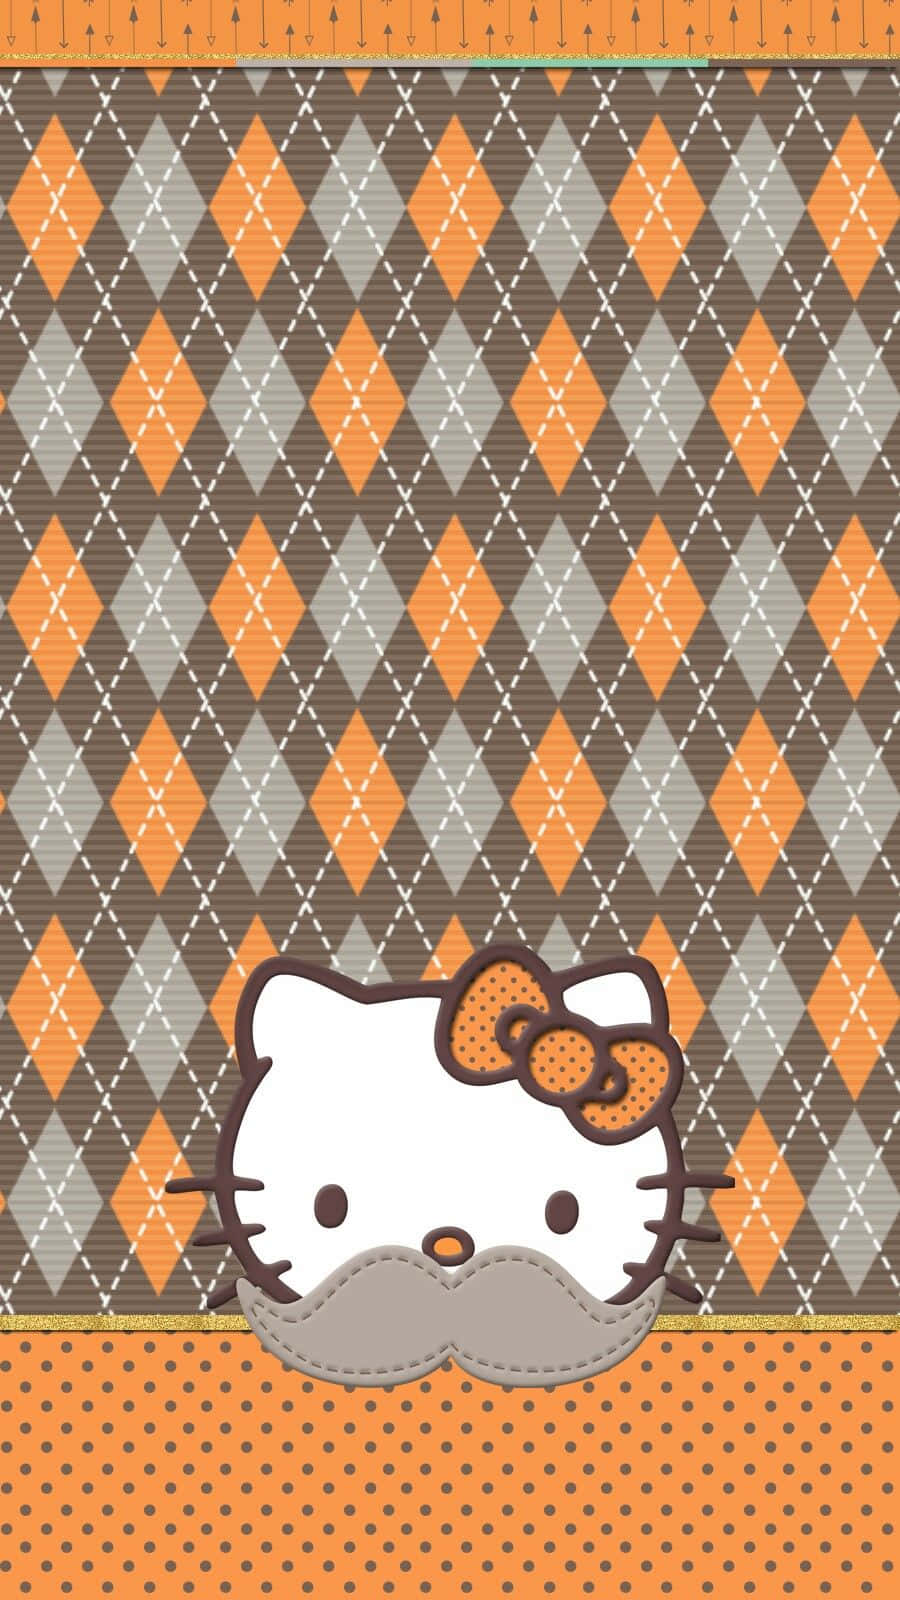 Enjoy A Fun And Festive Thanksgiving With Hello Kitty! Background